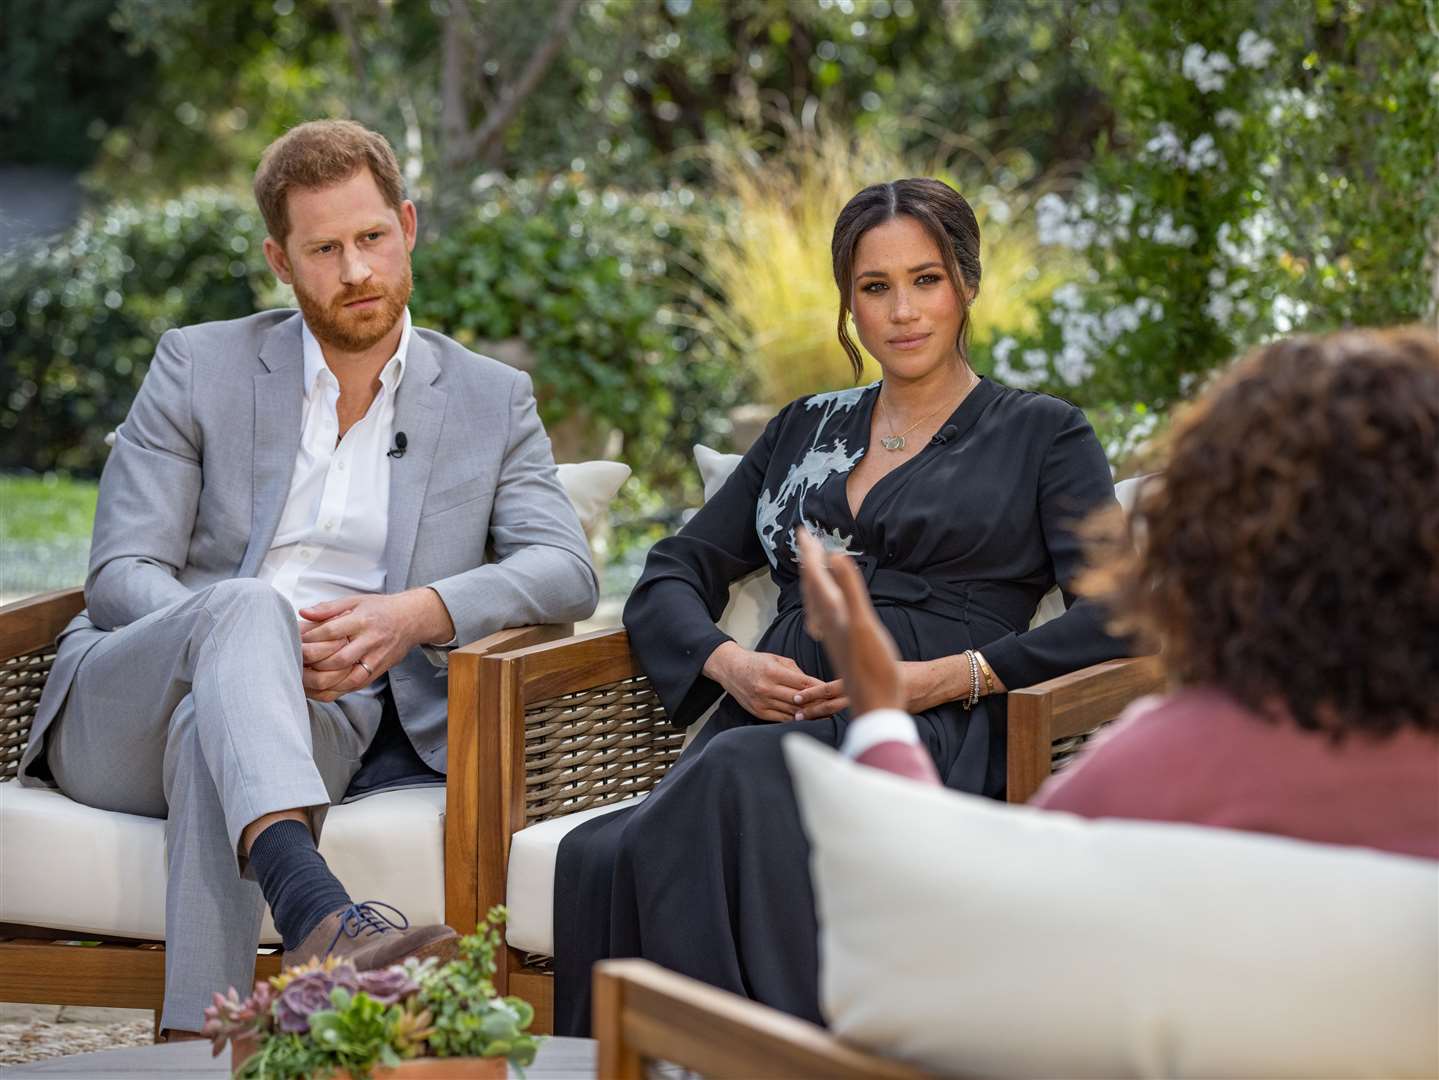 The Duke and Duchess of Sussex during their Oprah Winfrey interview (Joe Pugliese/Harpo Productions/PA)